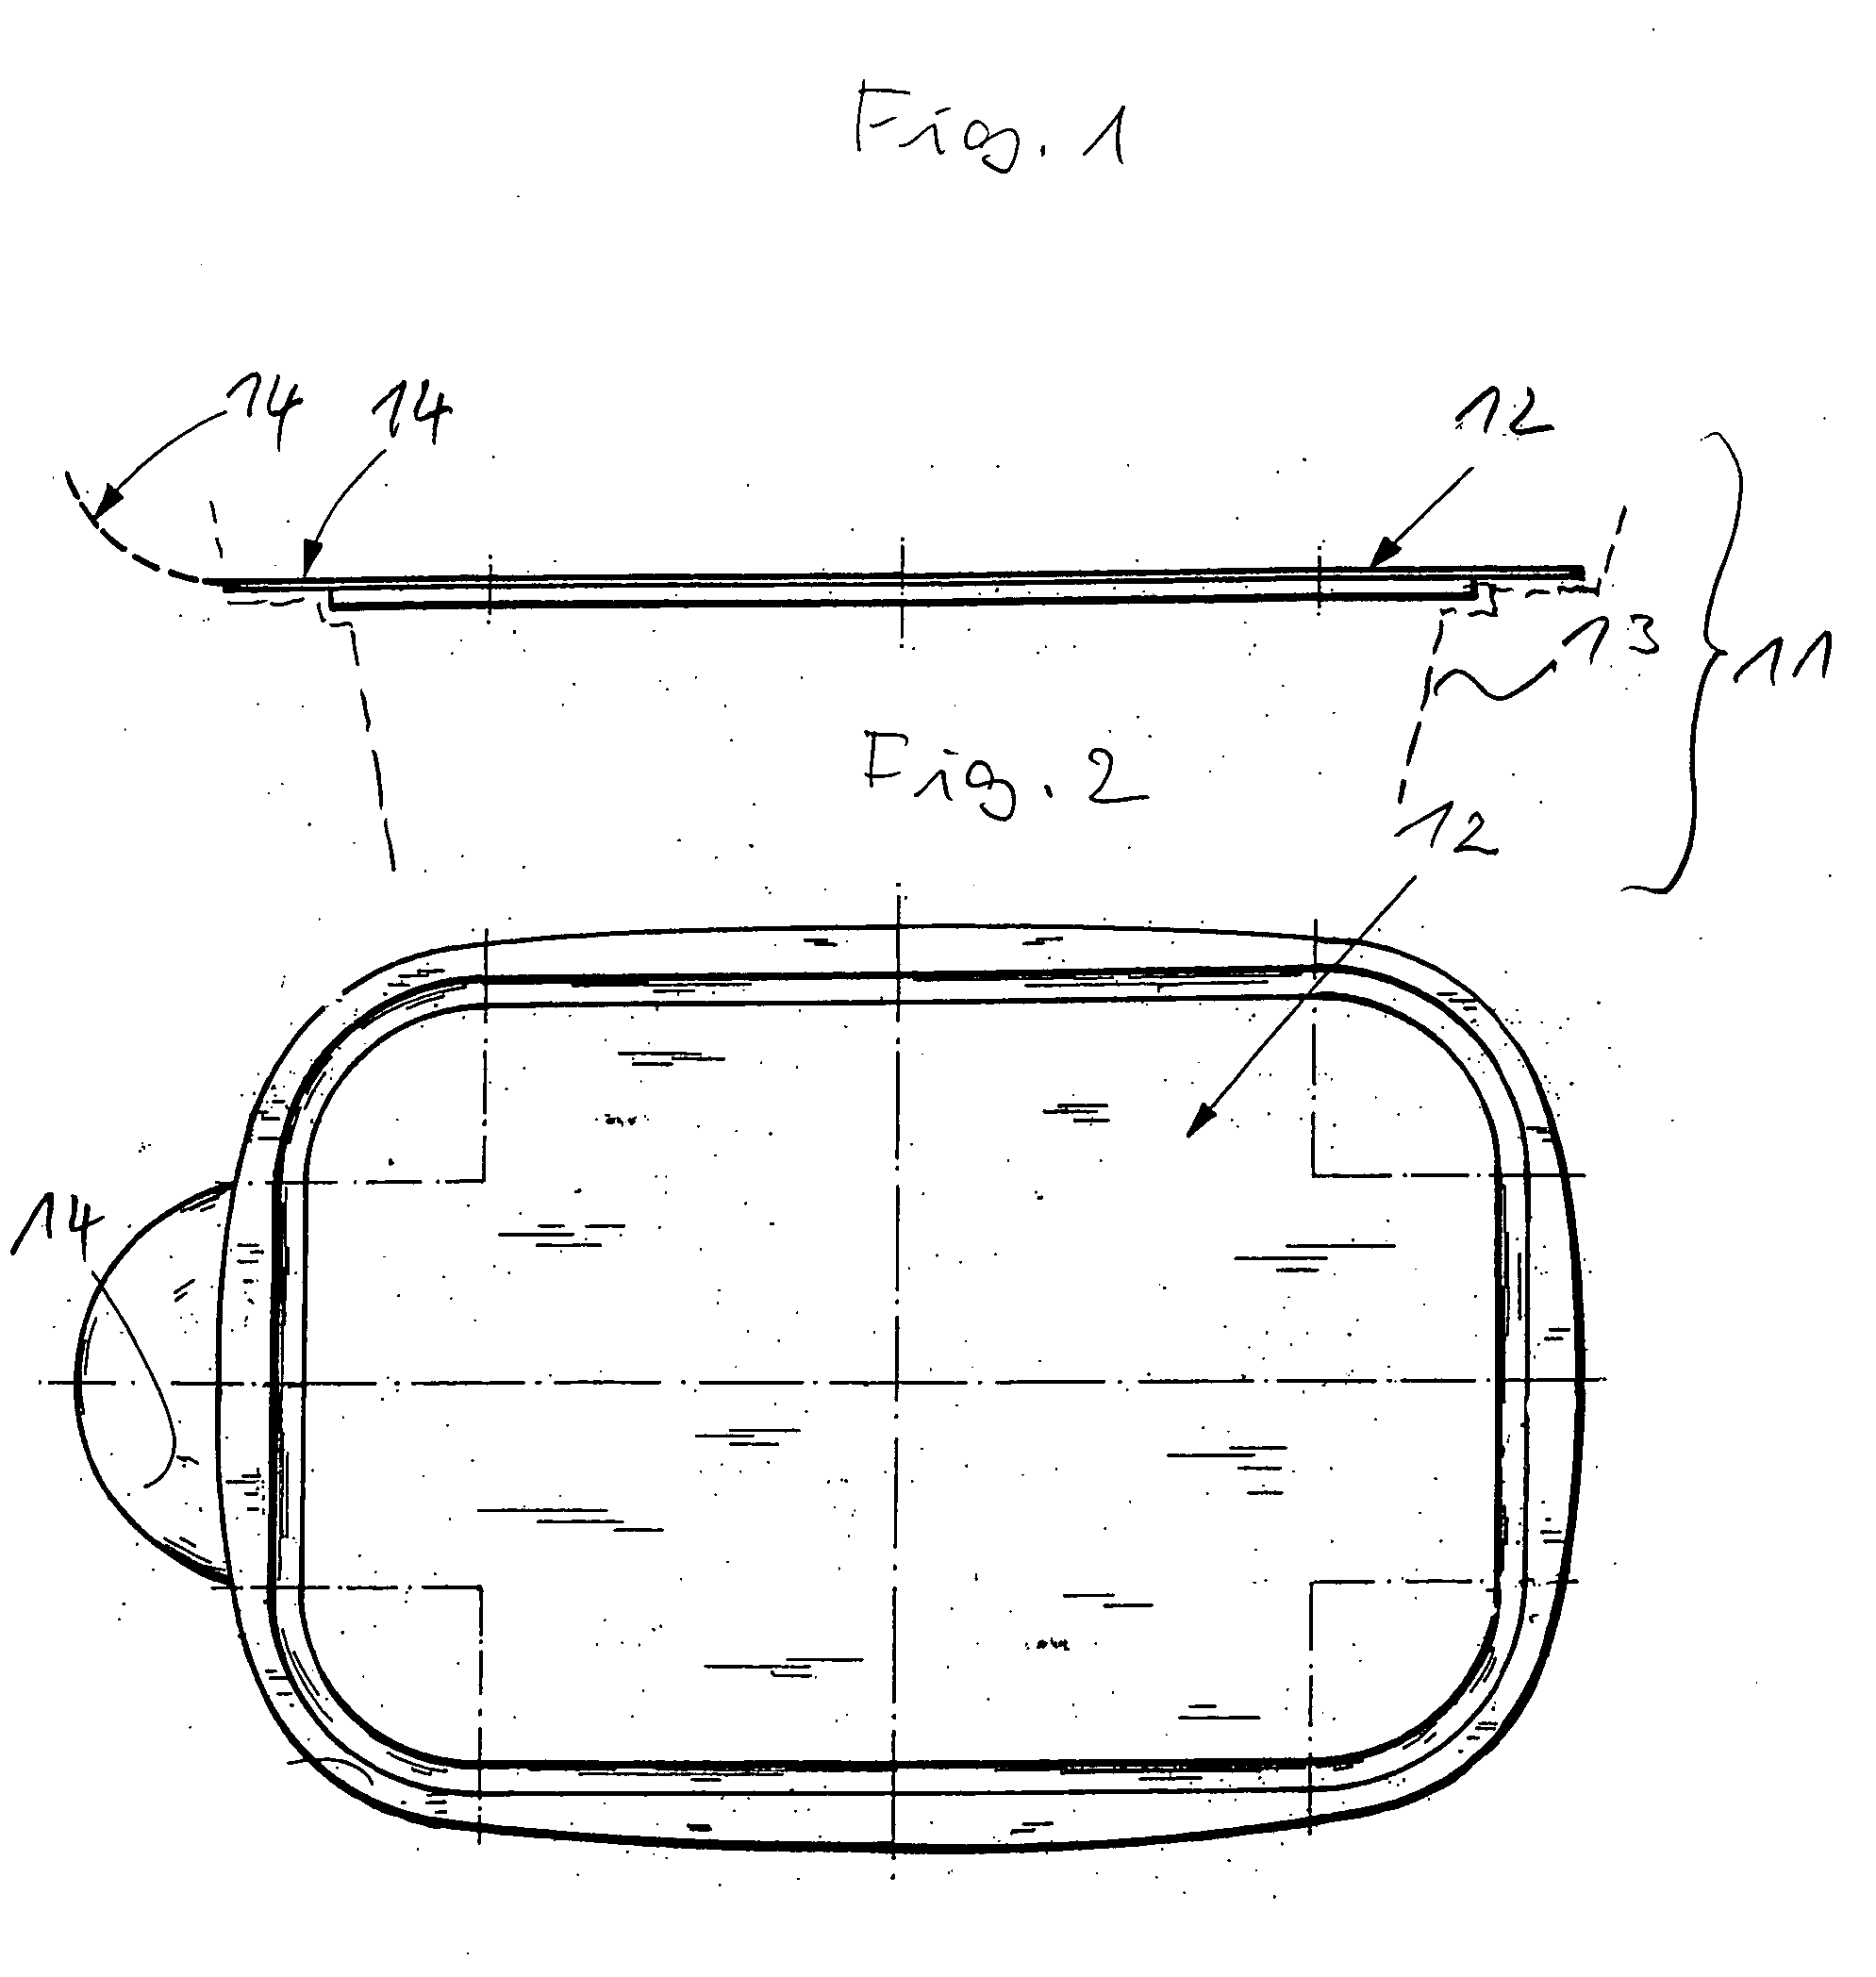 Method of manufacturing container top parts forming container lids